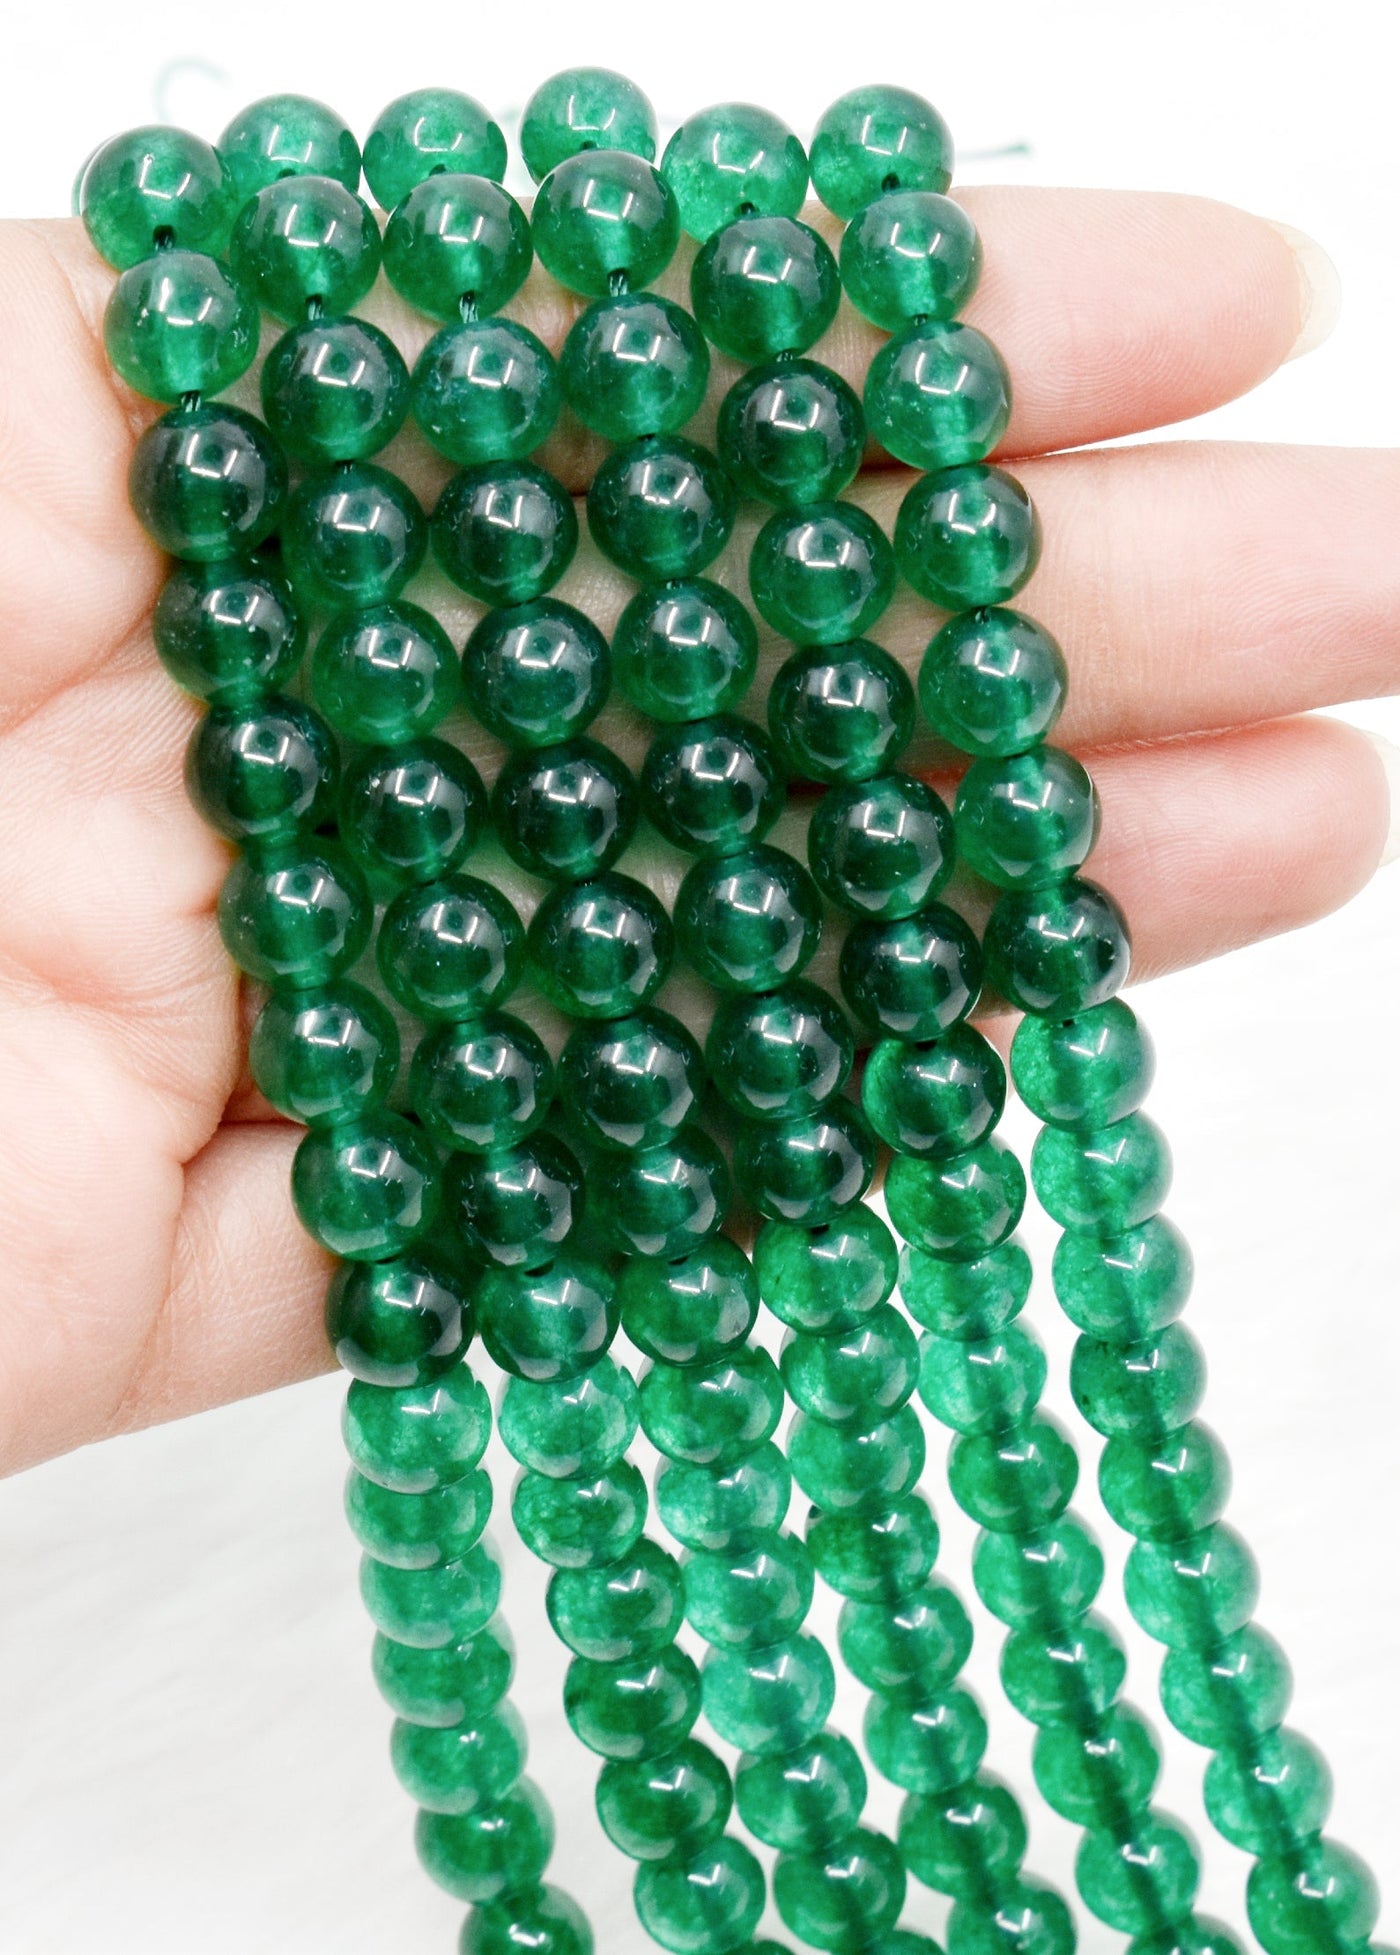 Green Jade Beads, Natural Round Crystal Beads 4mm to 10mm